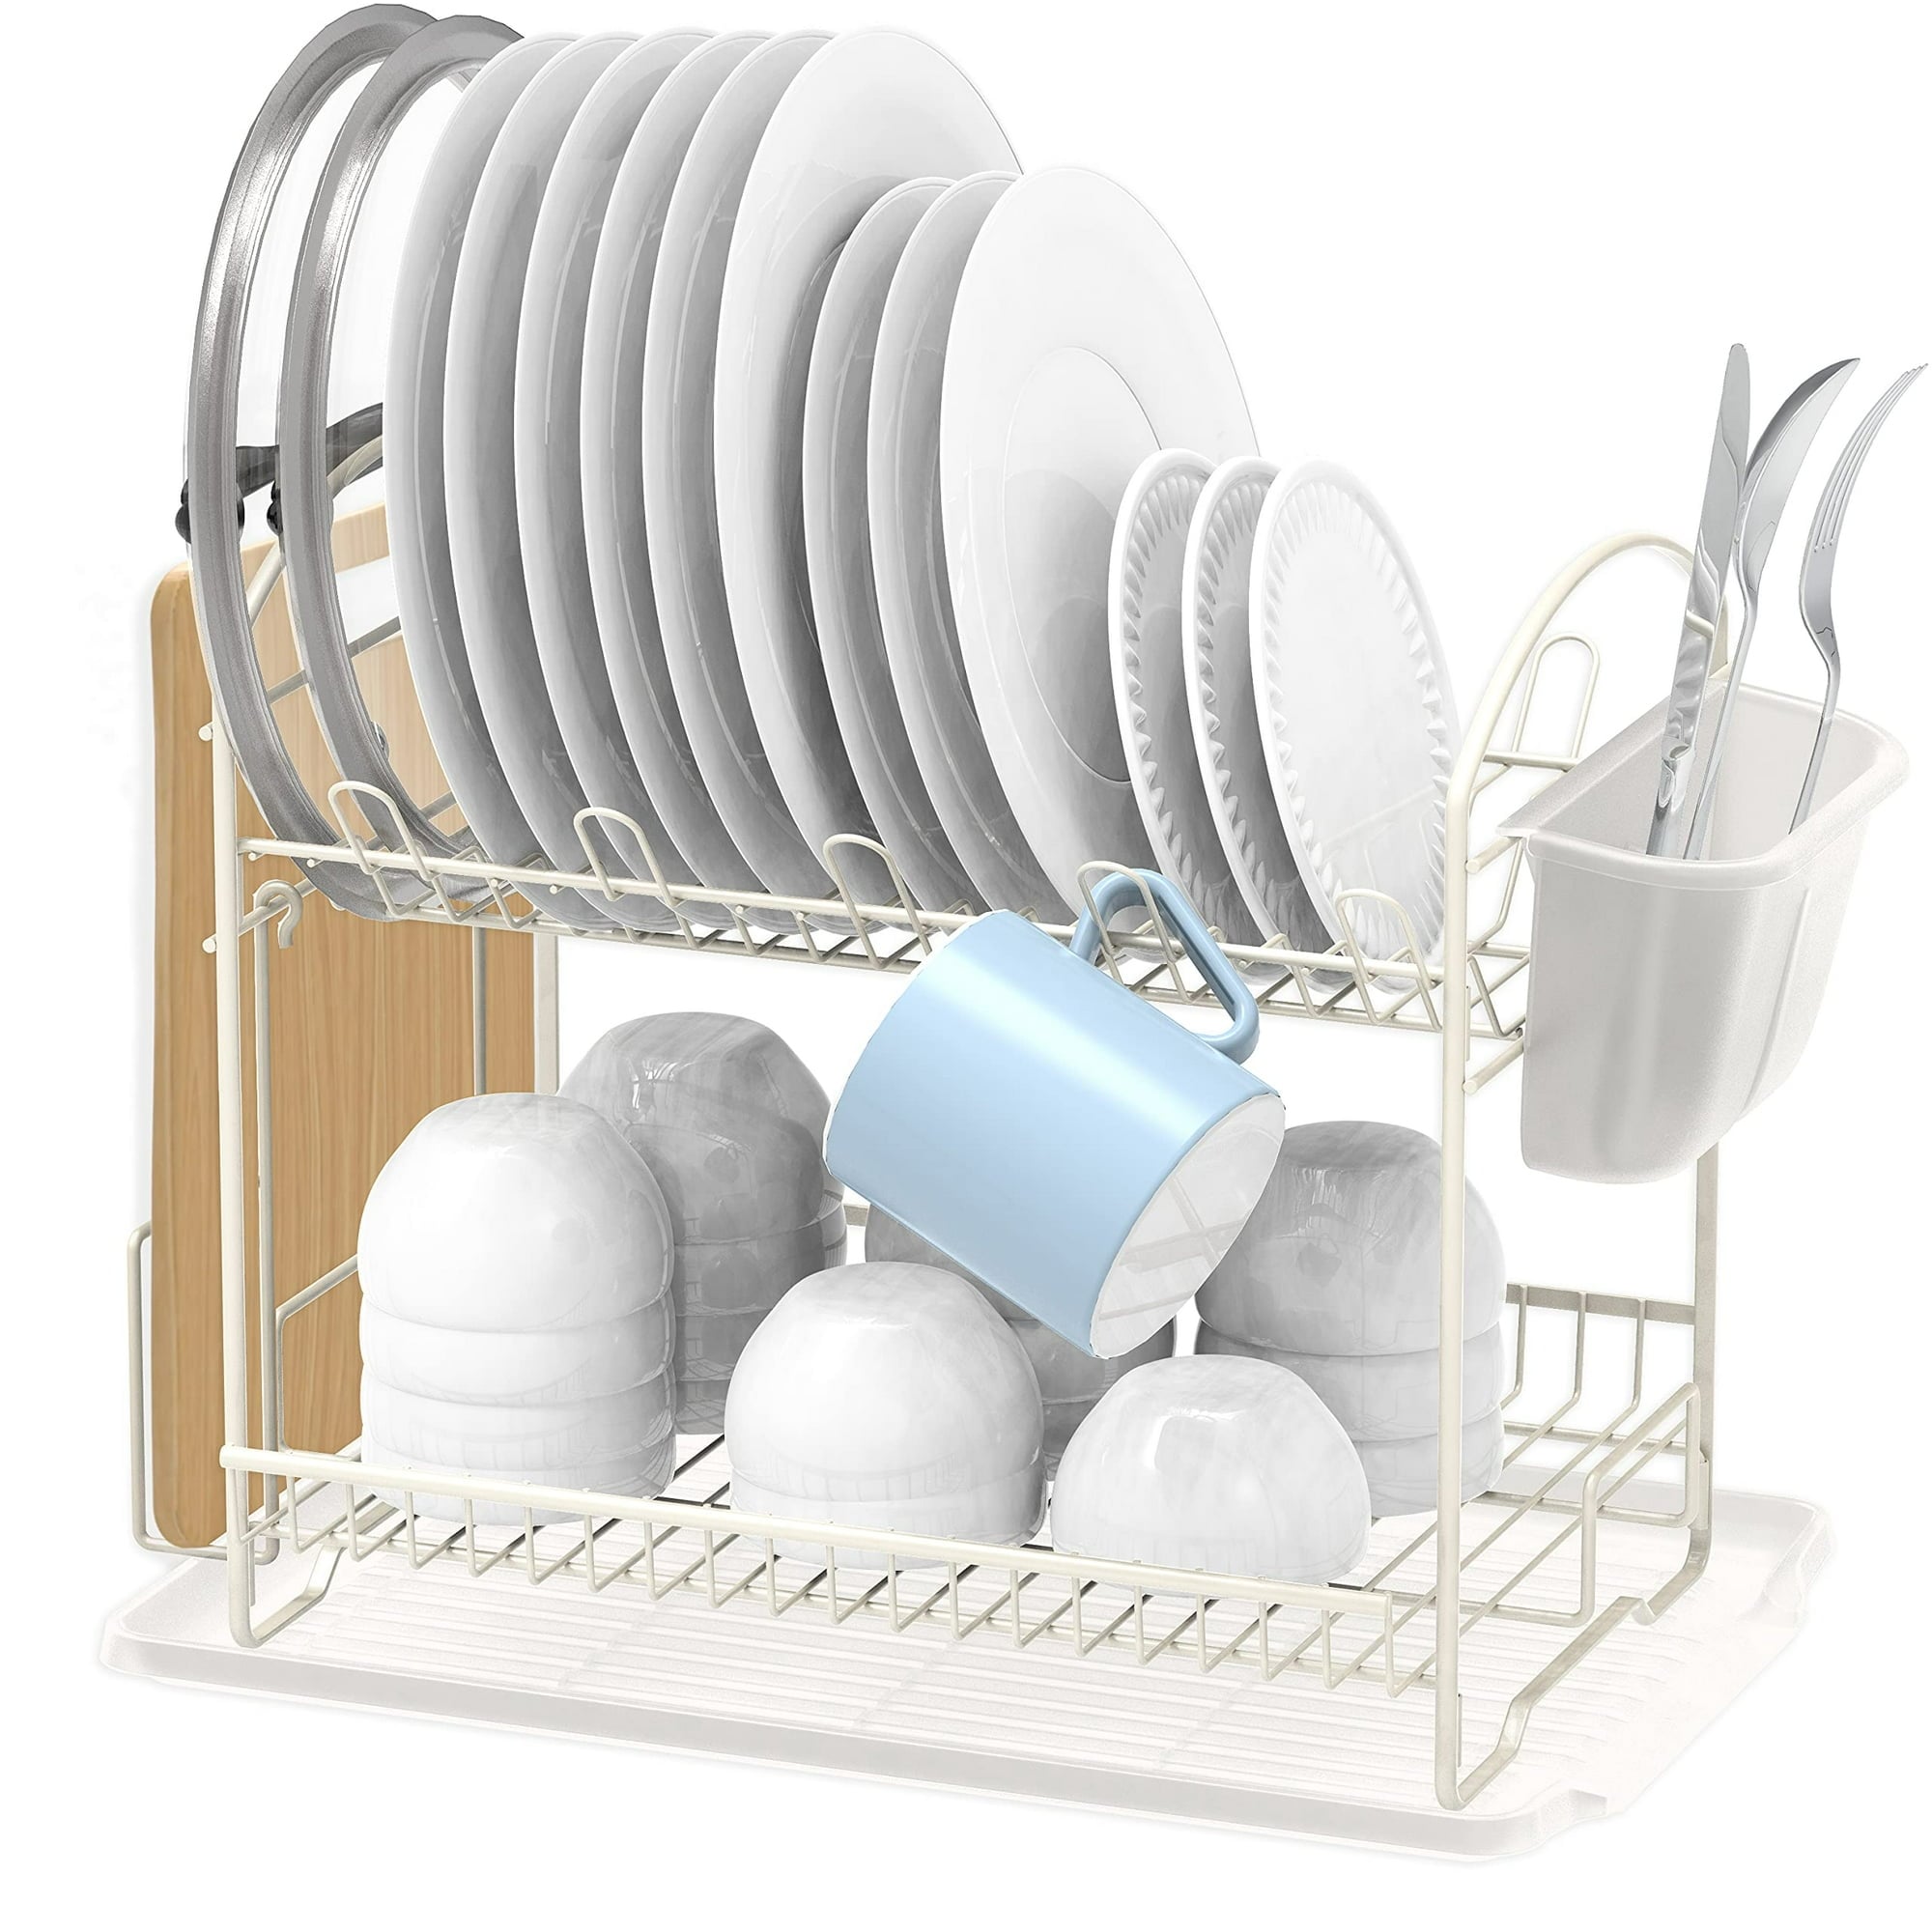 2-Tier Dish Rack with Drainboard, White - Bed Bath & Beyond - 37482095